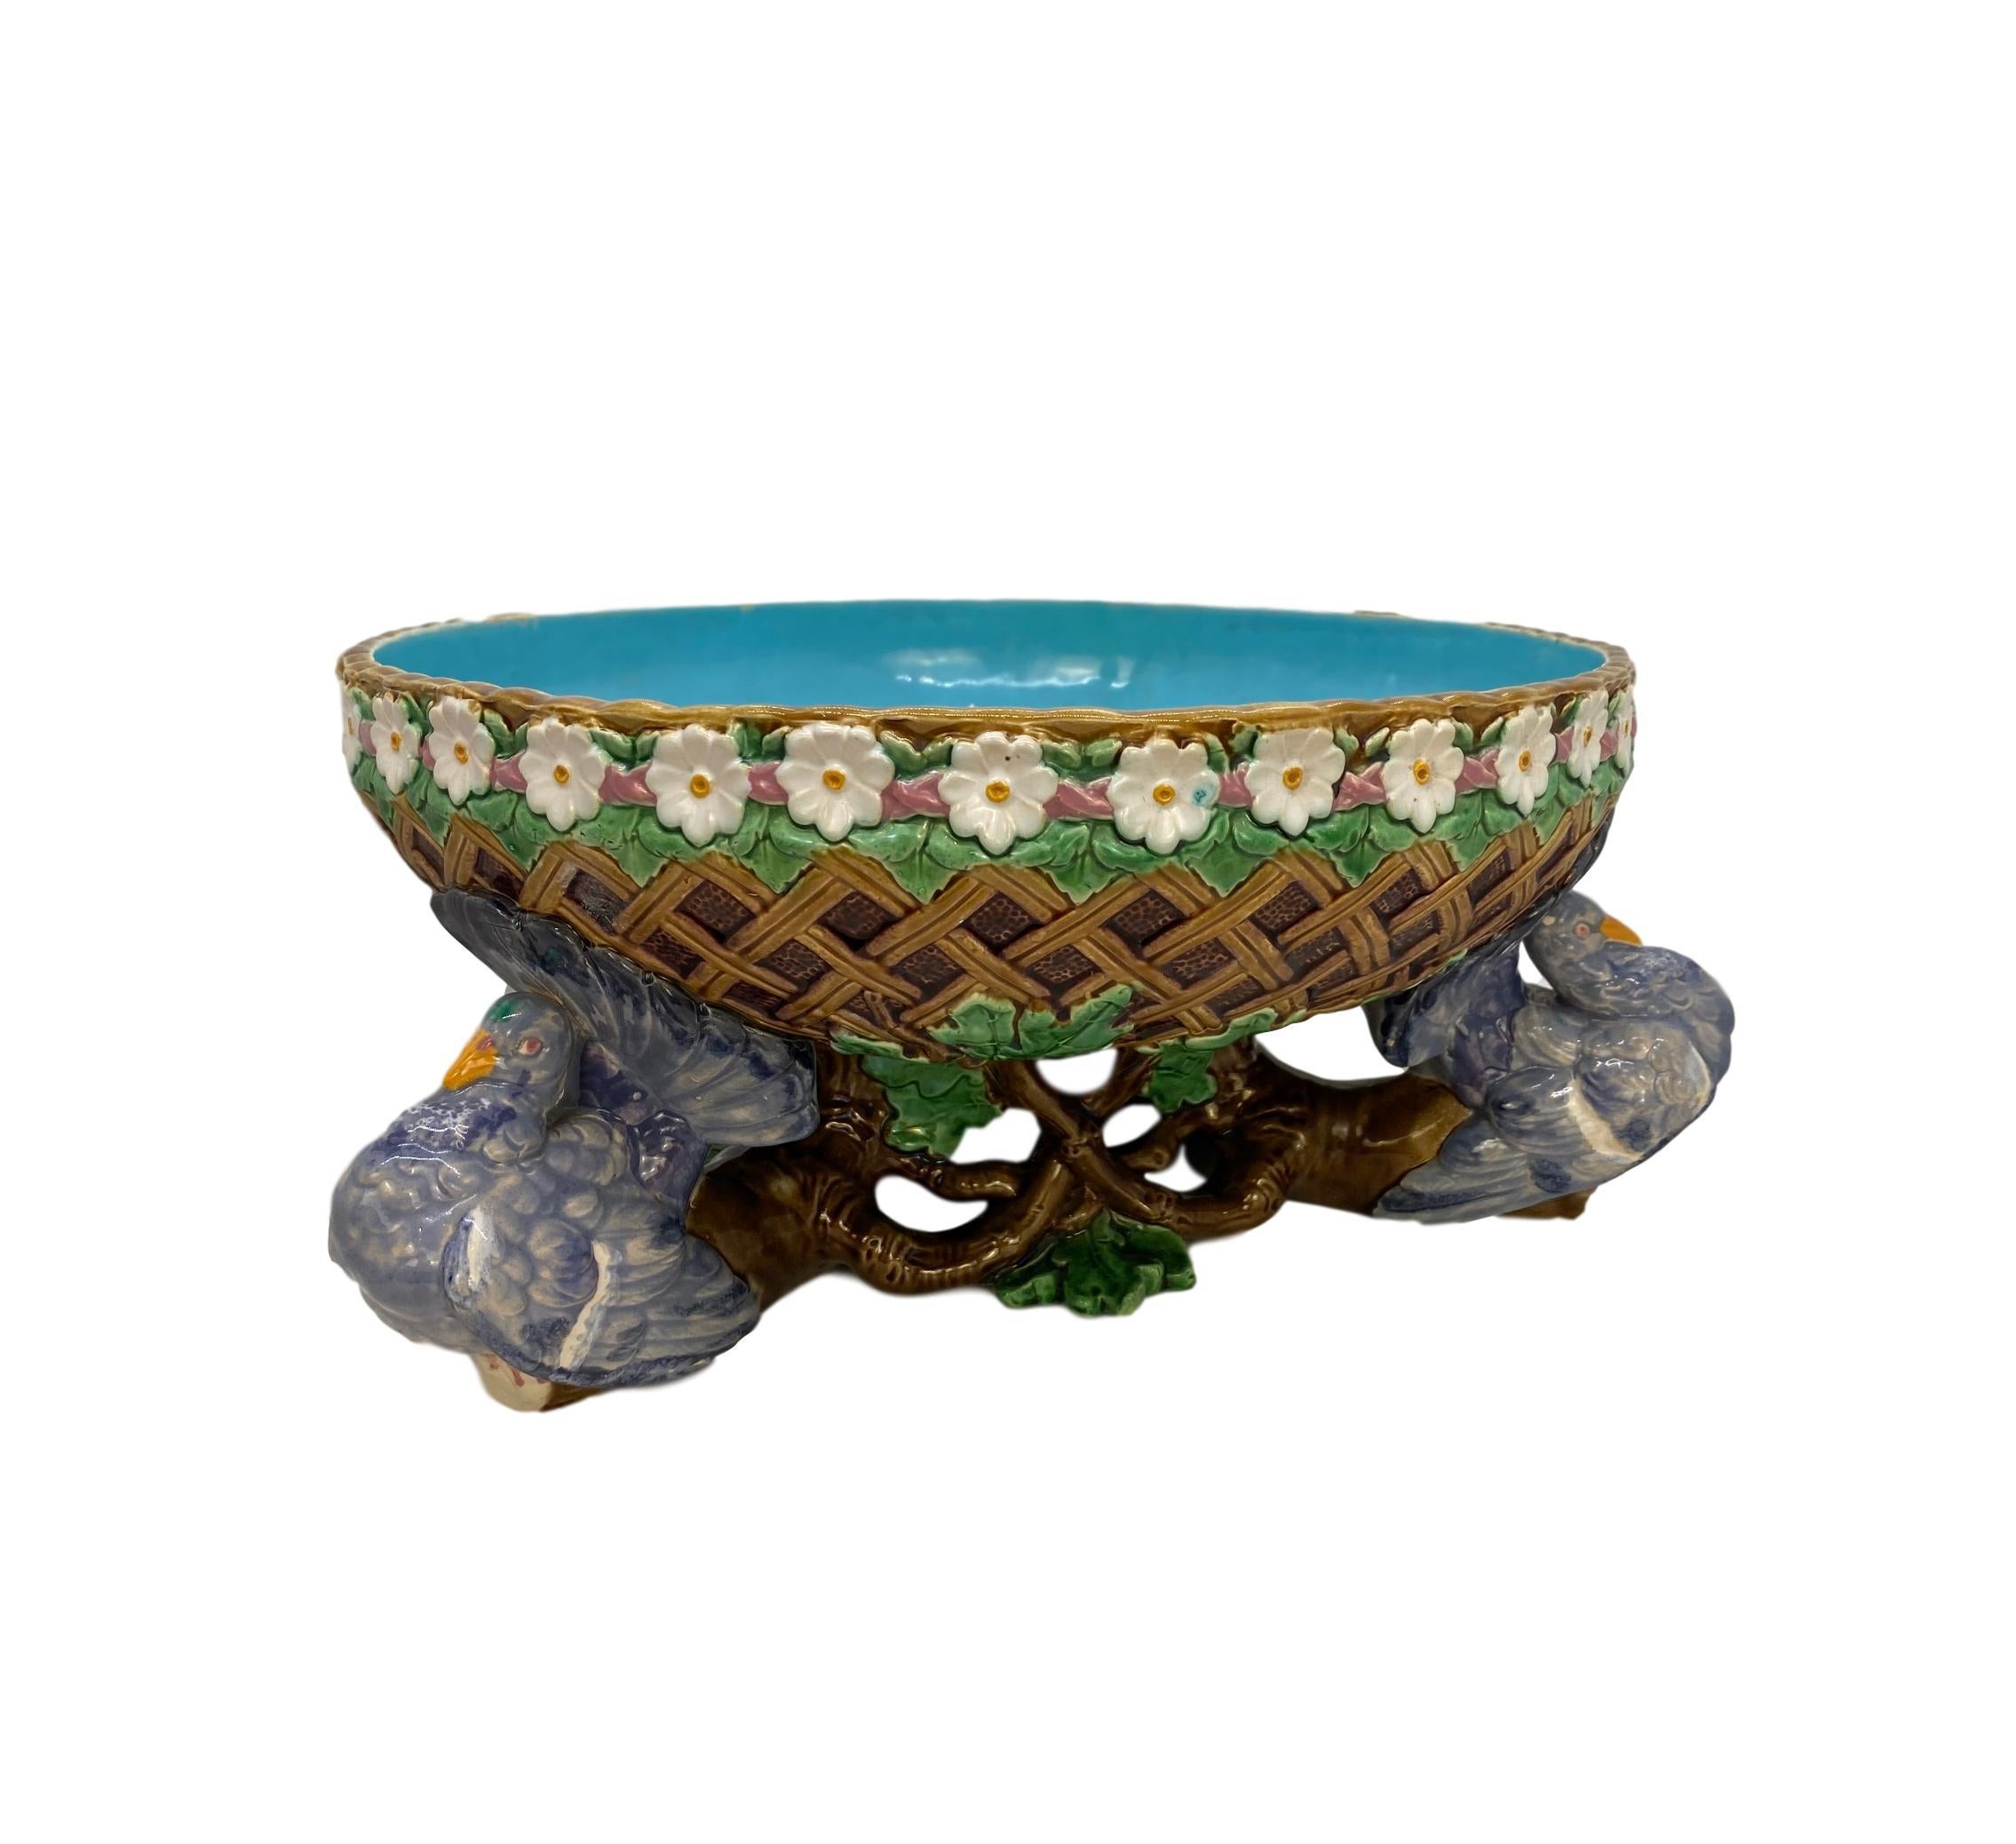 Molded Minton Majolica Large Fruit Bowl with Three Pigeons Support, English, Dated 1870 For Sale